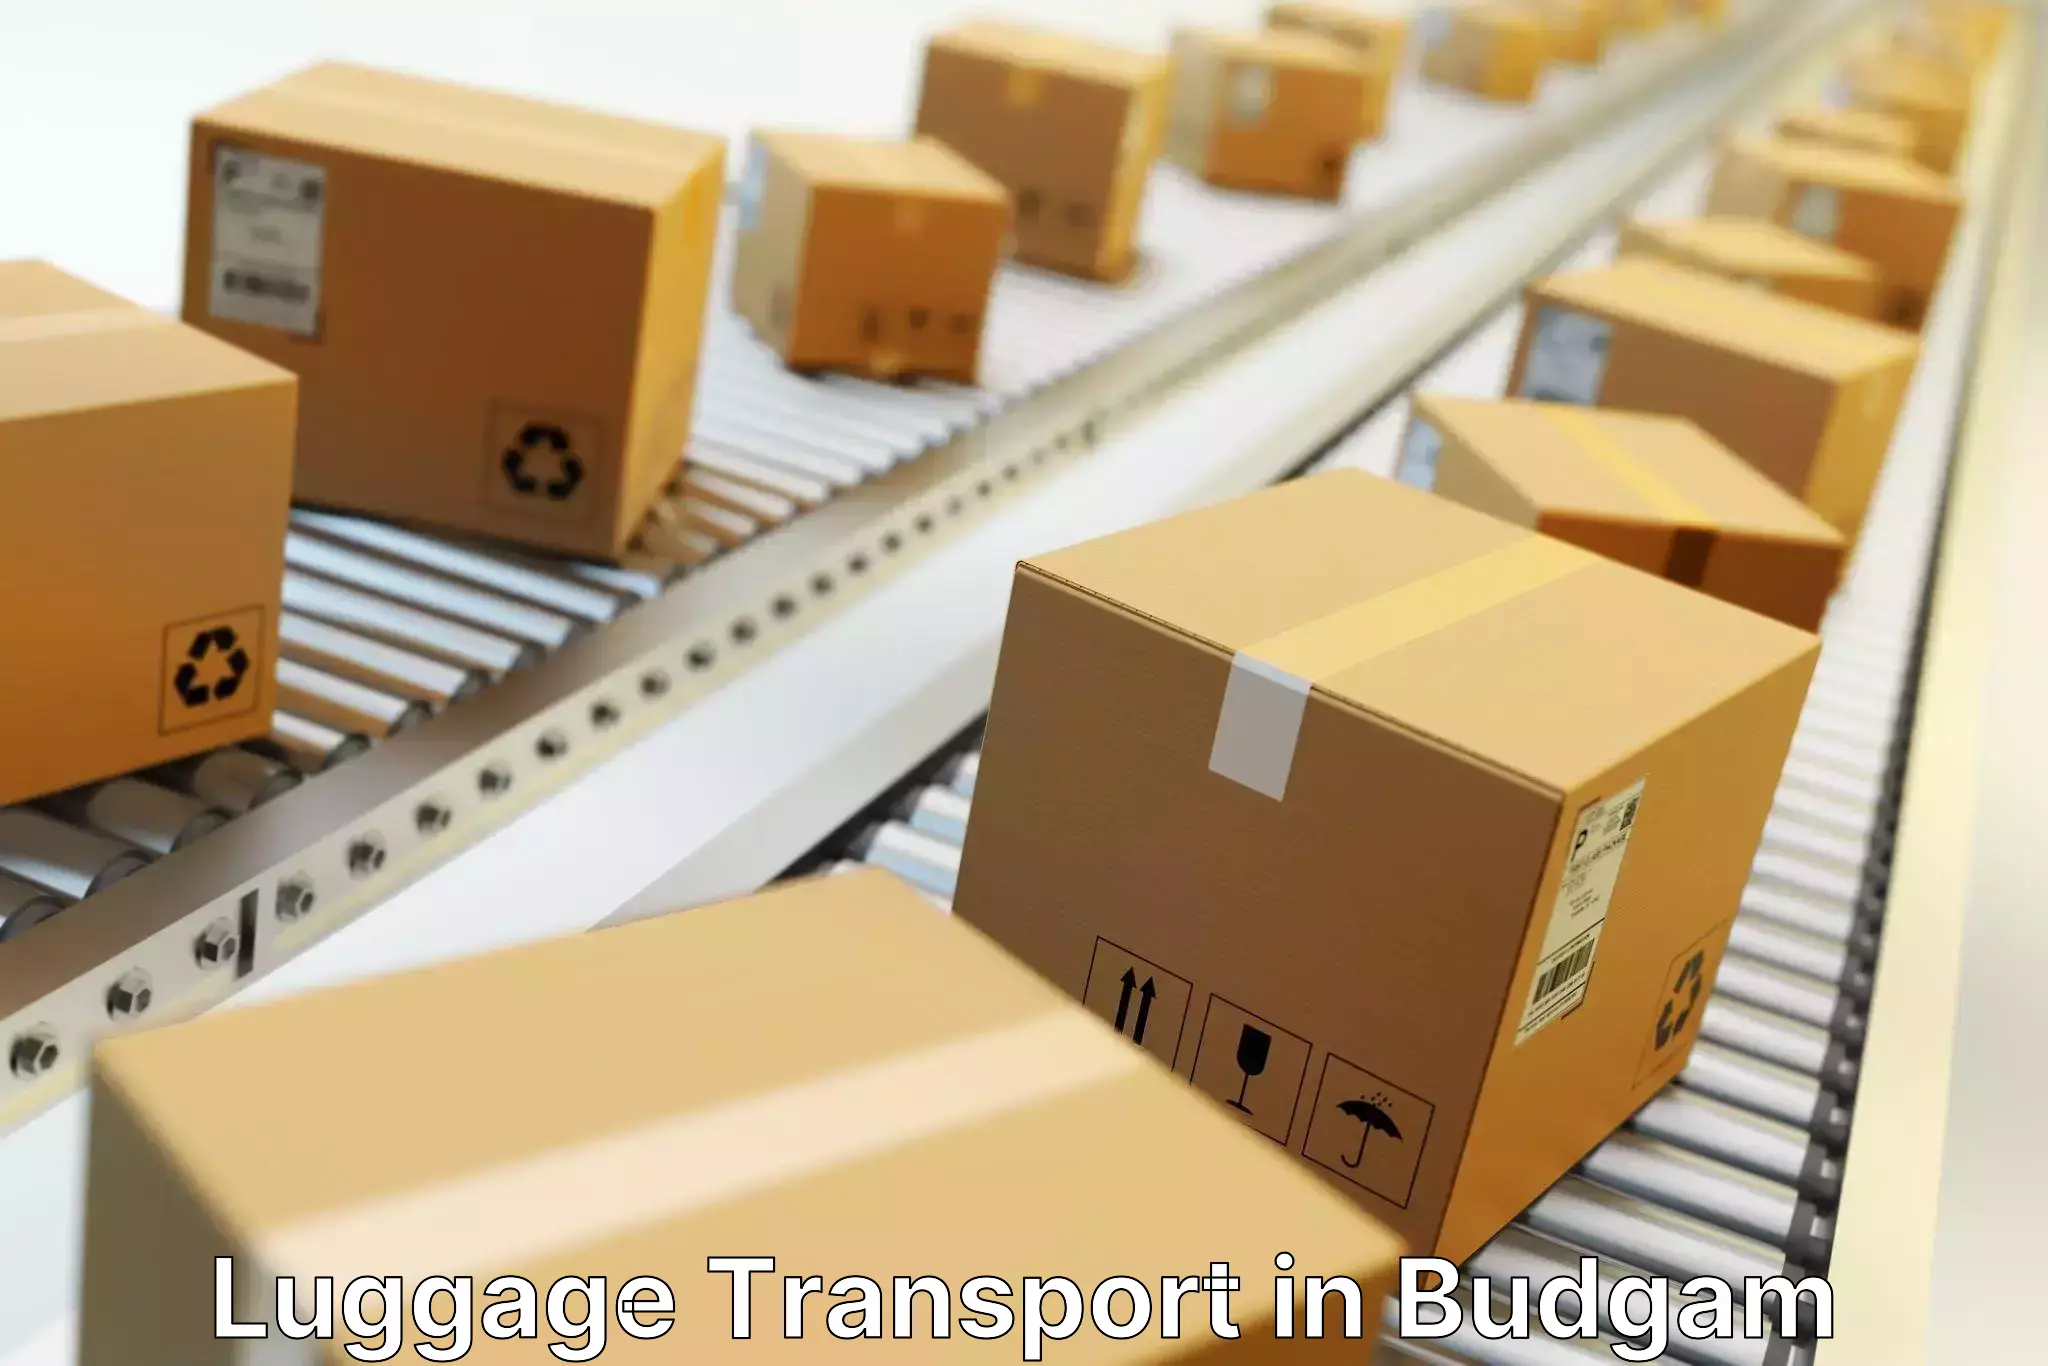 Luggage transport guidelines in Budgam